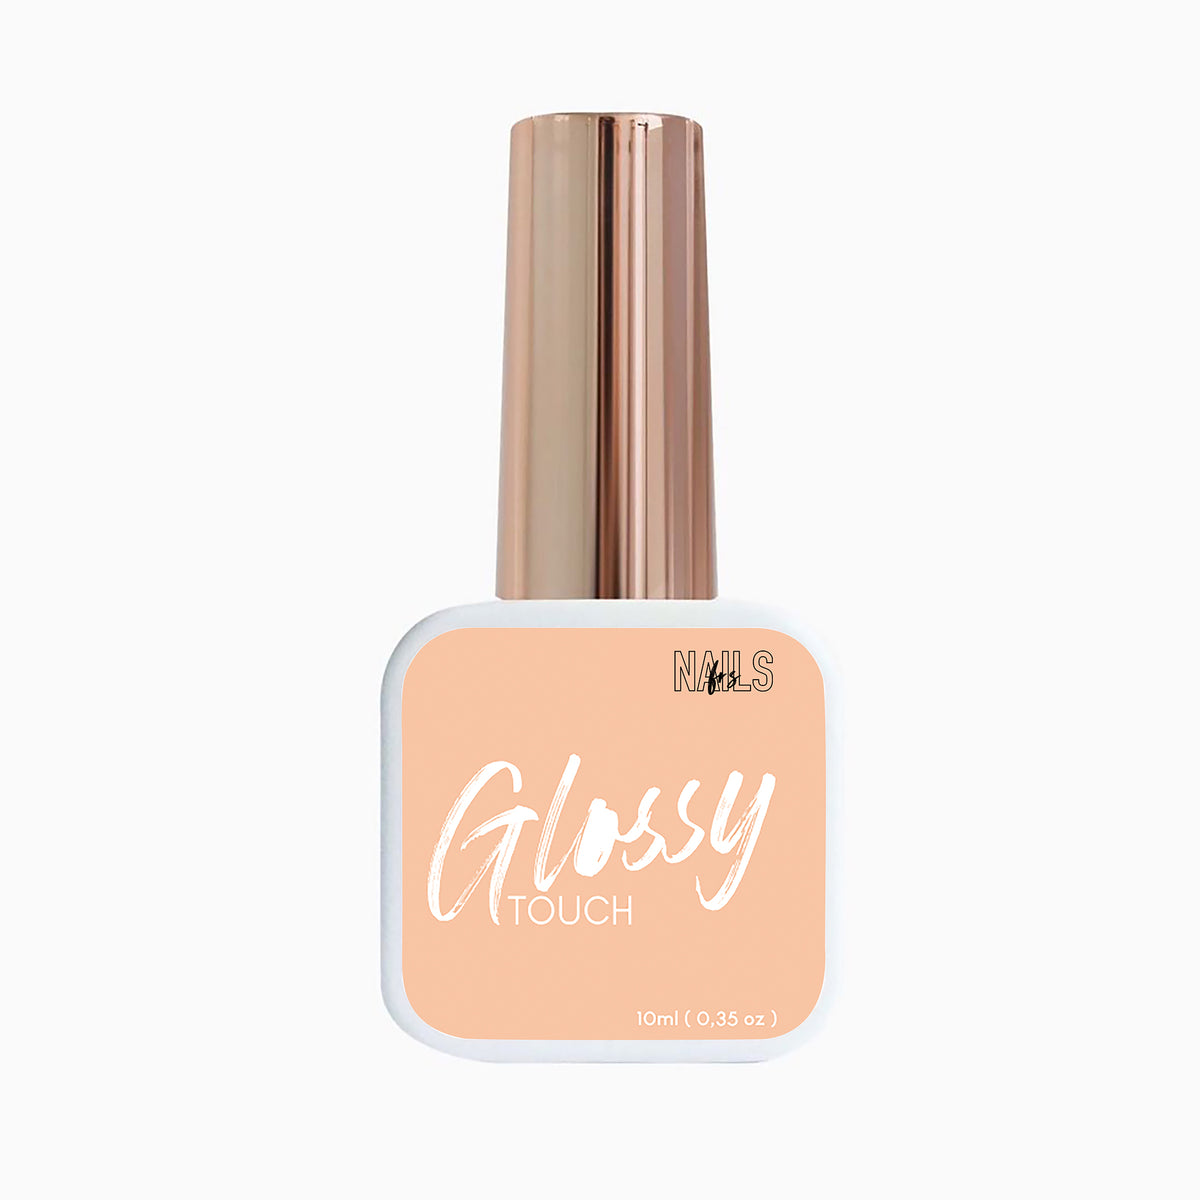 Top coat Glossy Touch